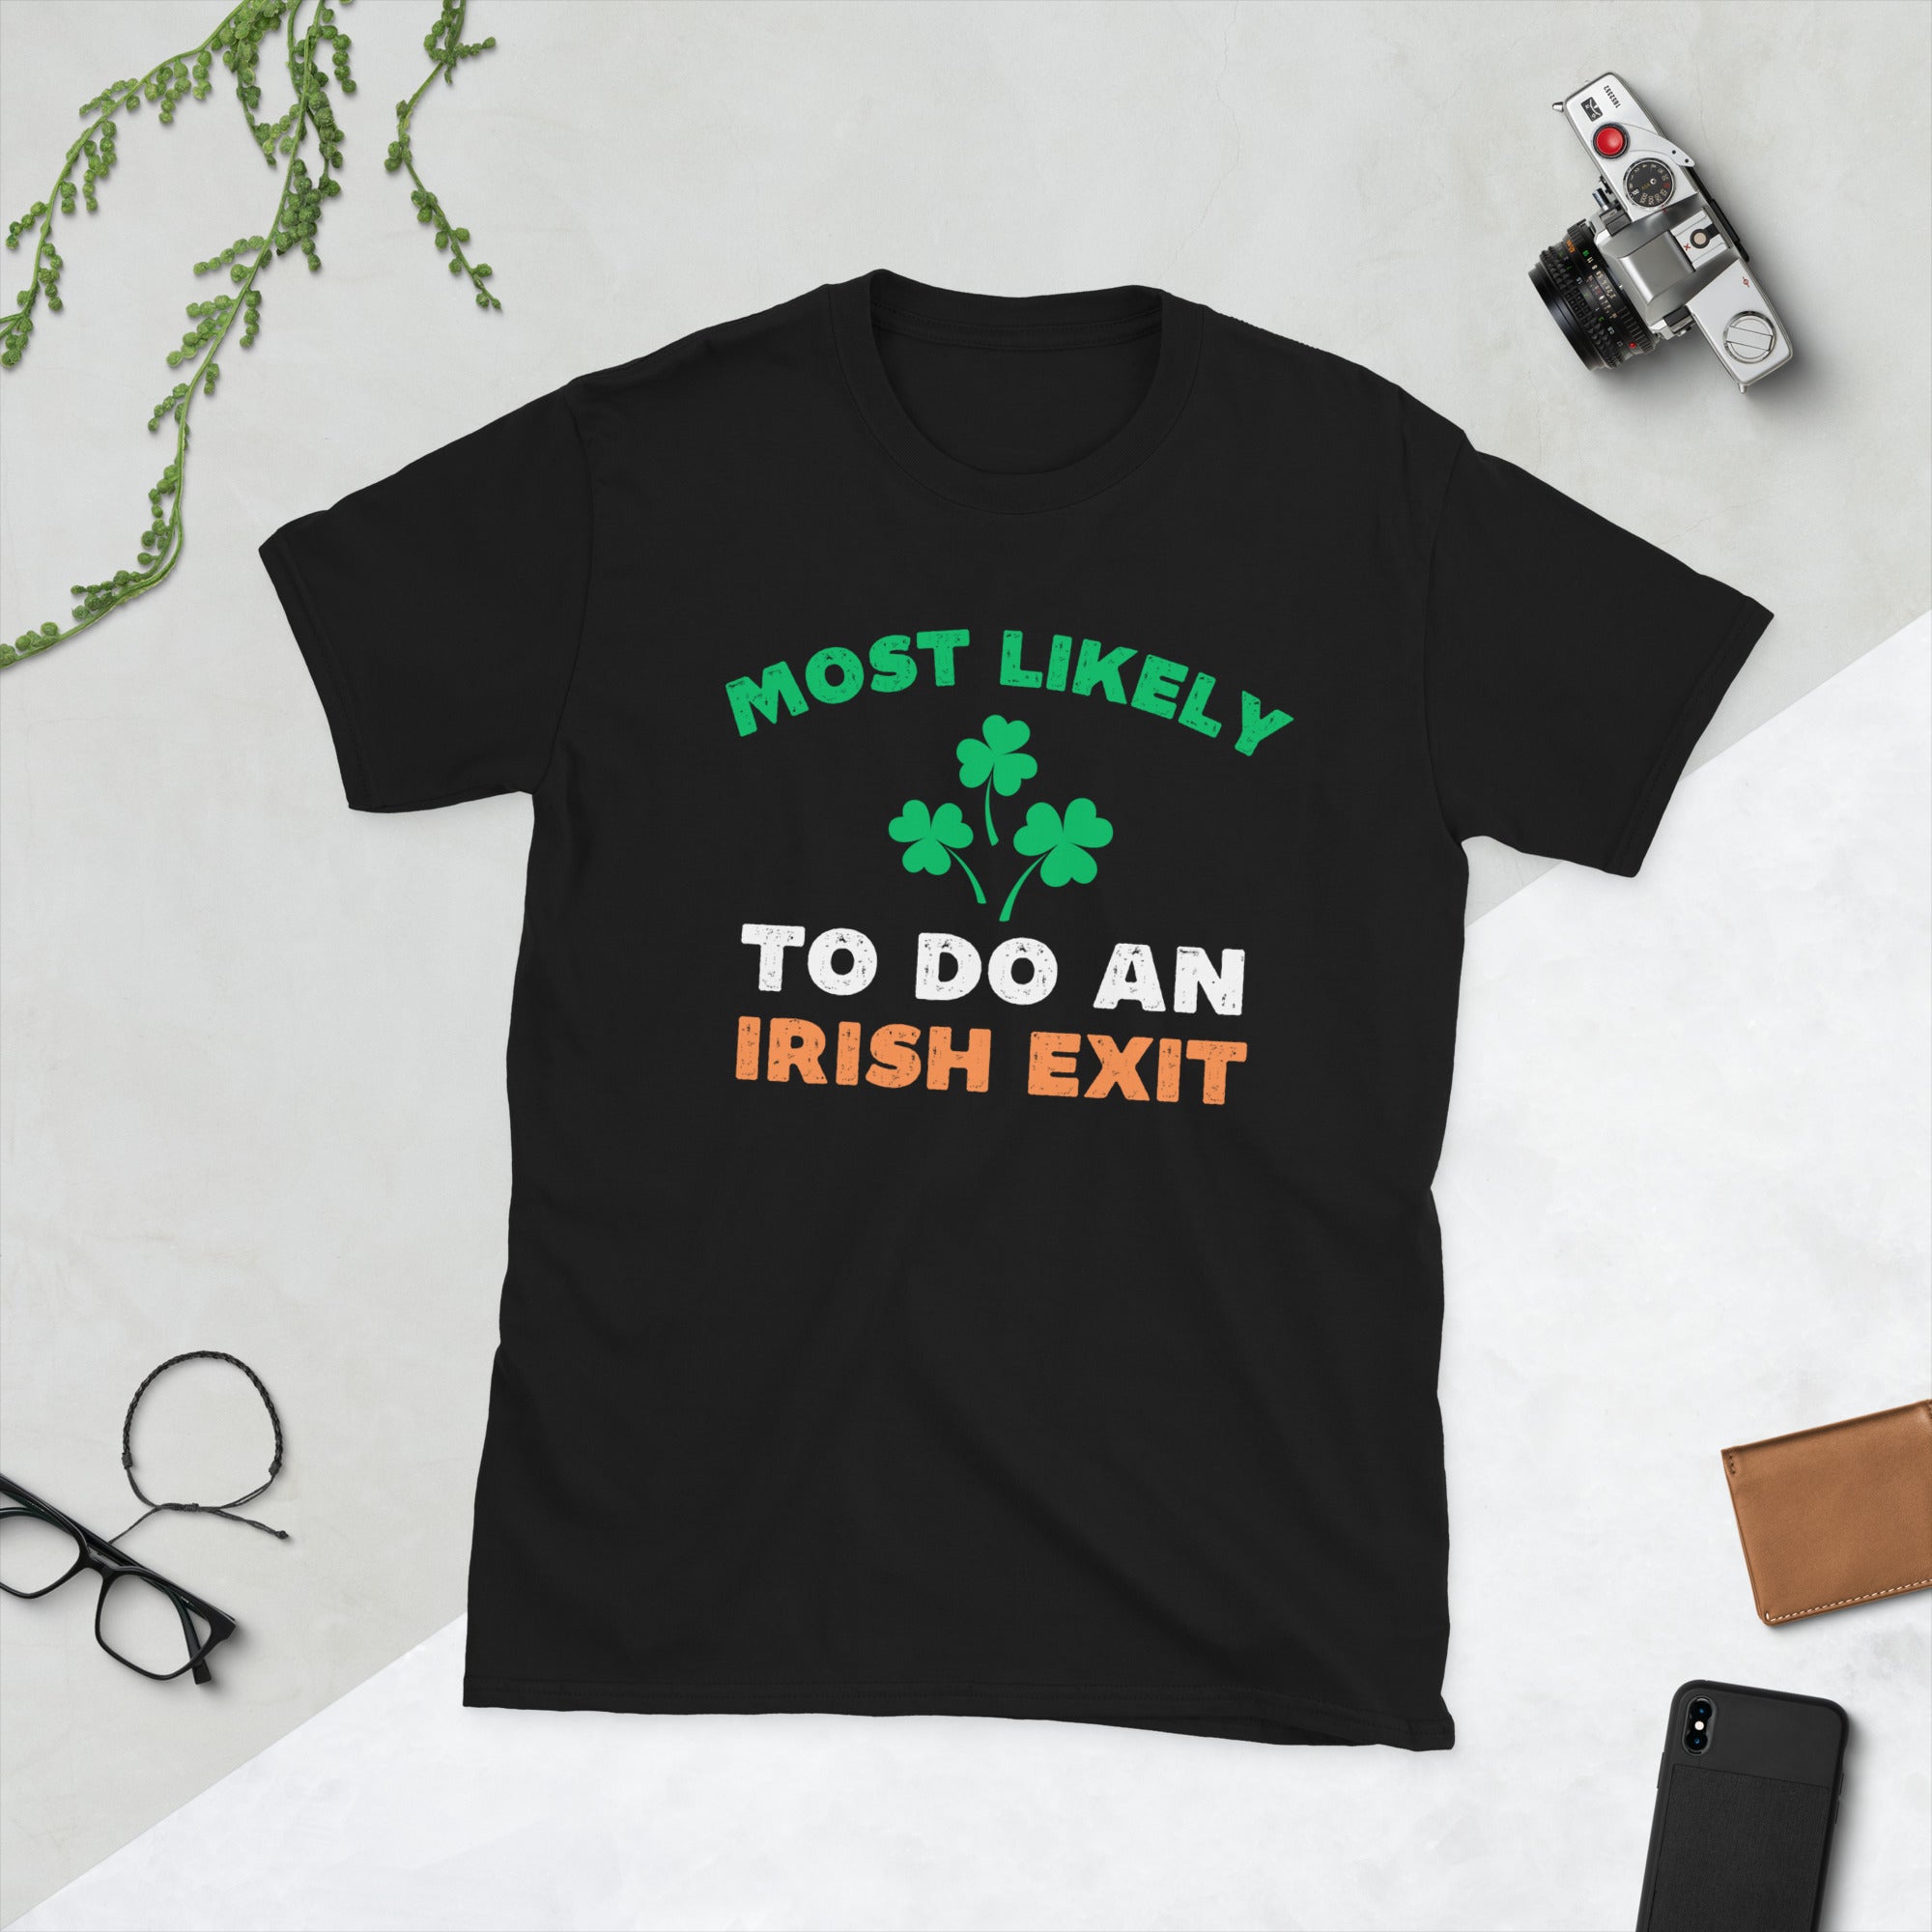 Most Likely To Do An Irish Exit Shirt, St Patricks Day Party Group Matching Tshirts, St Patricks Day Tee, Irish Gifts, Shamrock T Shirt - Madeinsea©